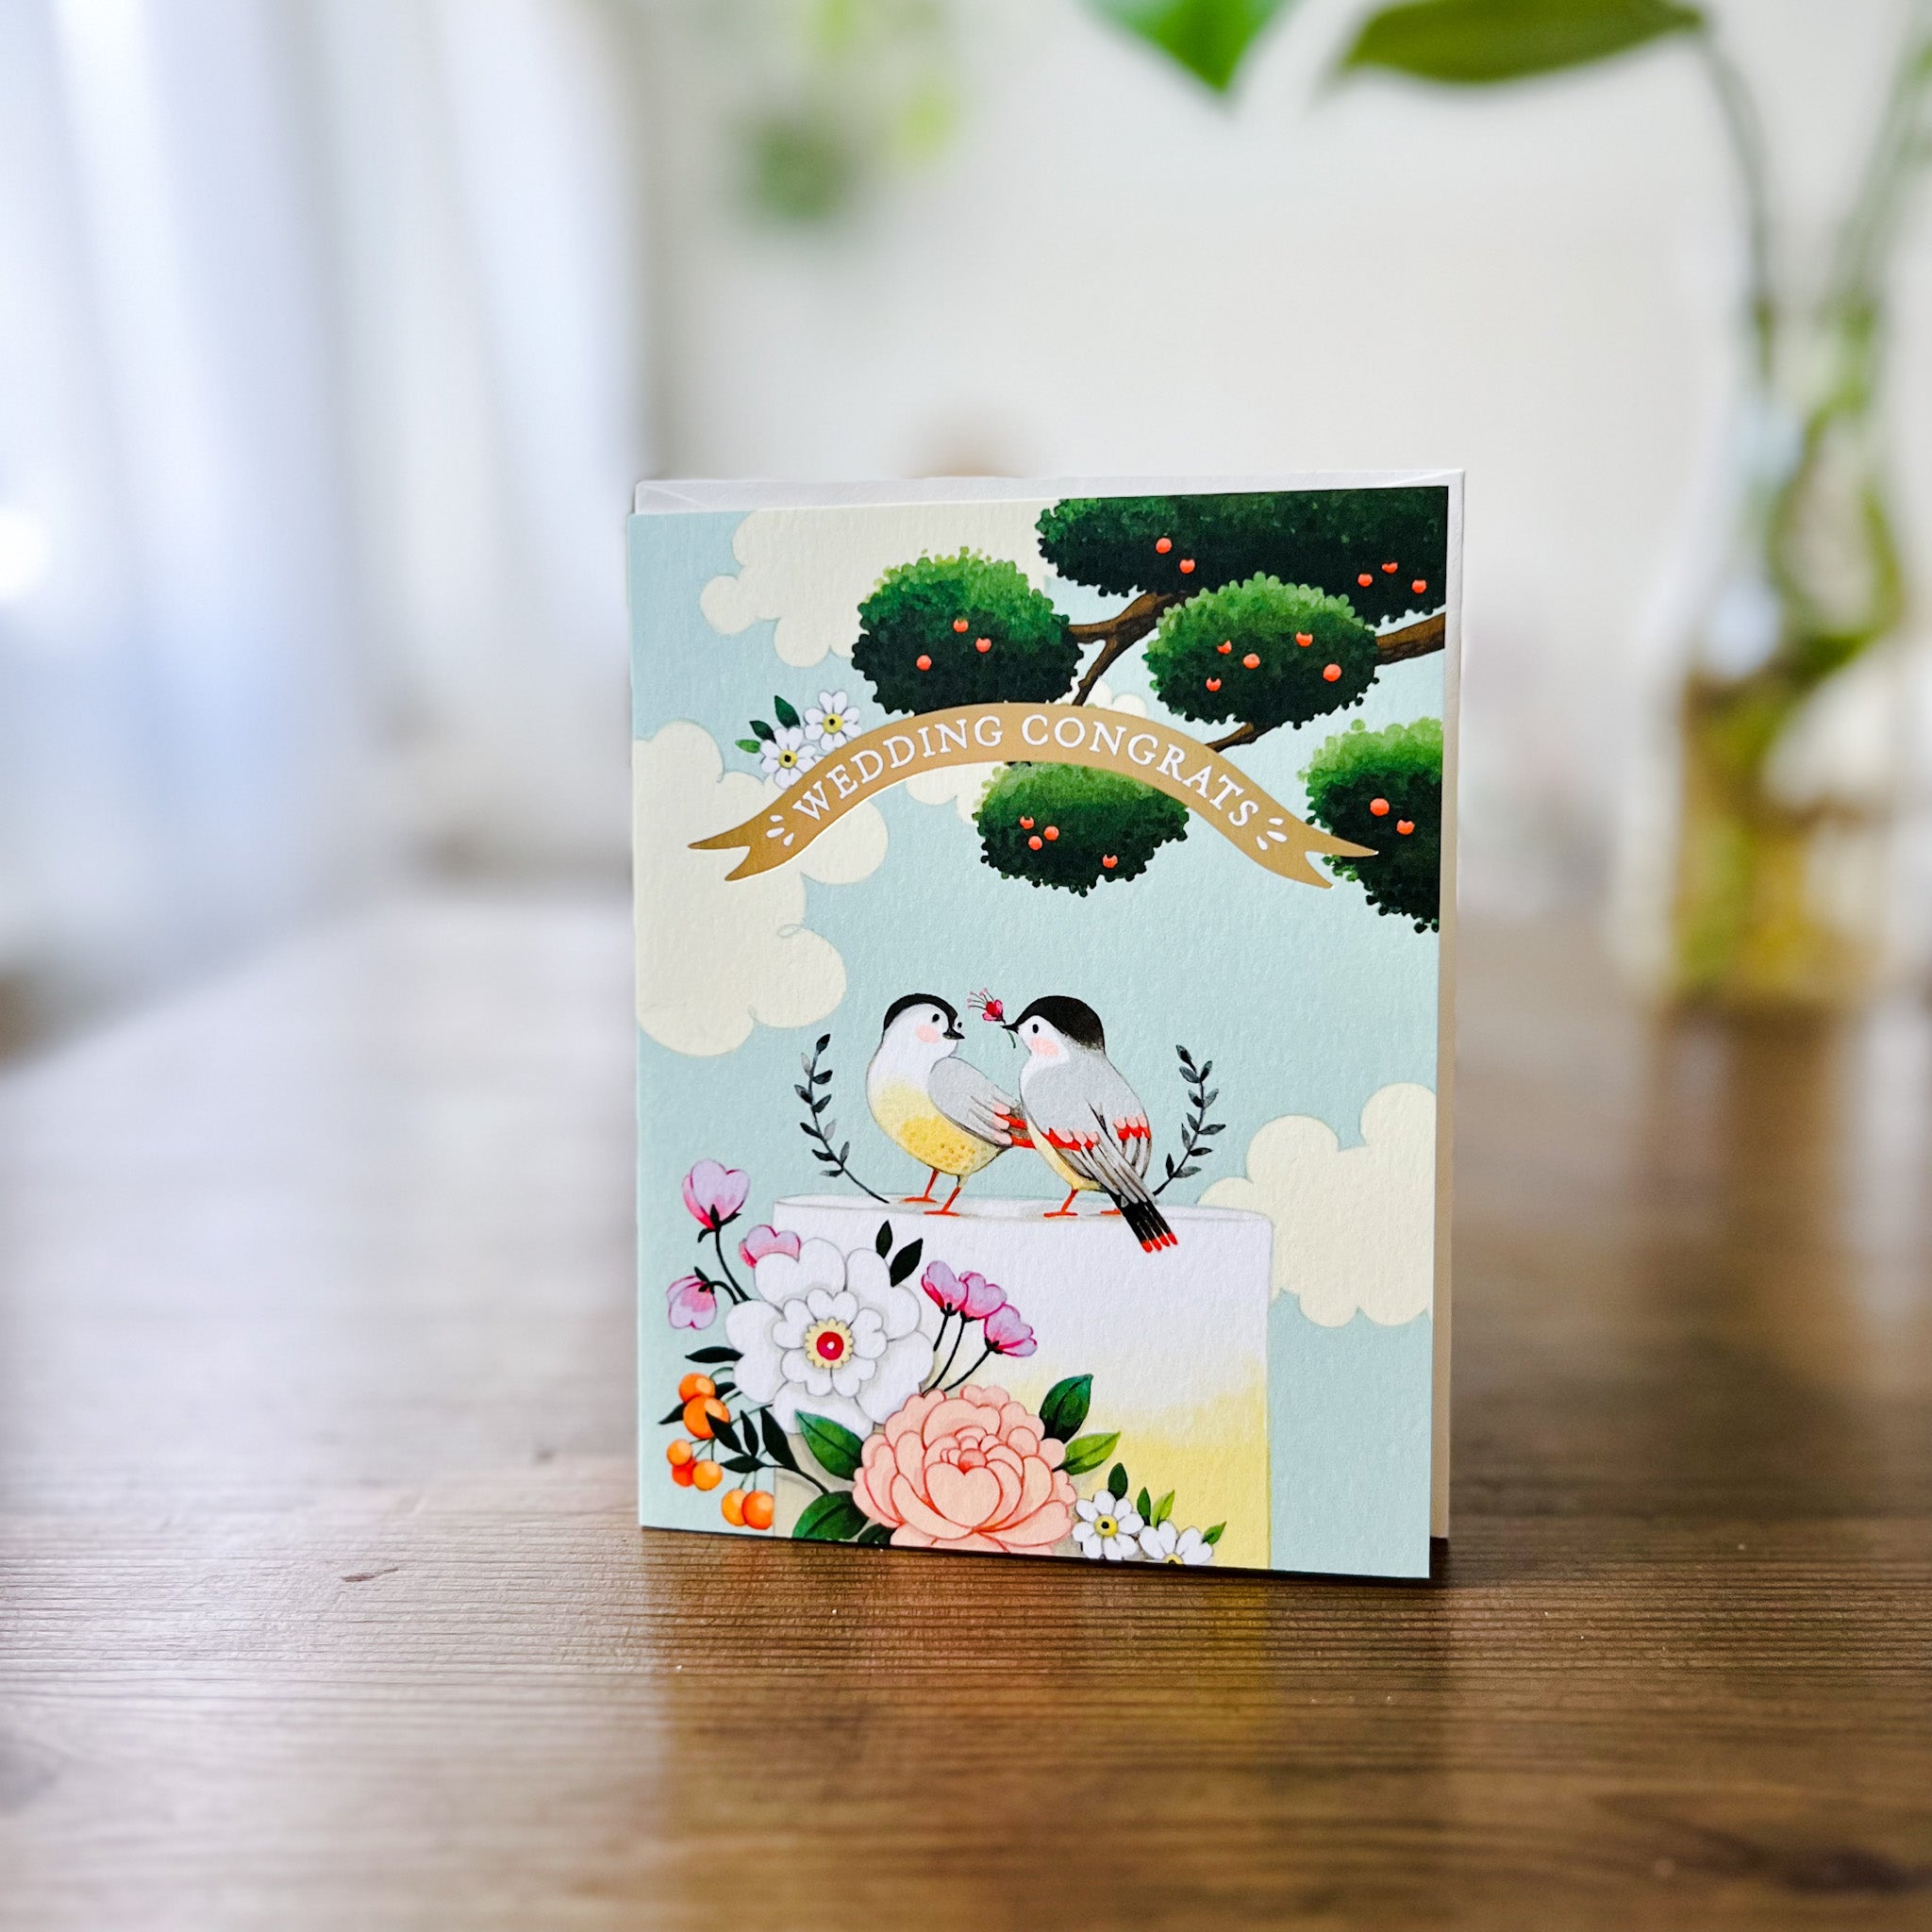 sky blue greeting card with illustration of apple tree and wedding cake with flowers and birds sitting on top with gold banner that reads "wedding congrats" standing on wood table